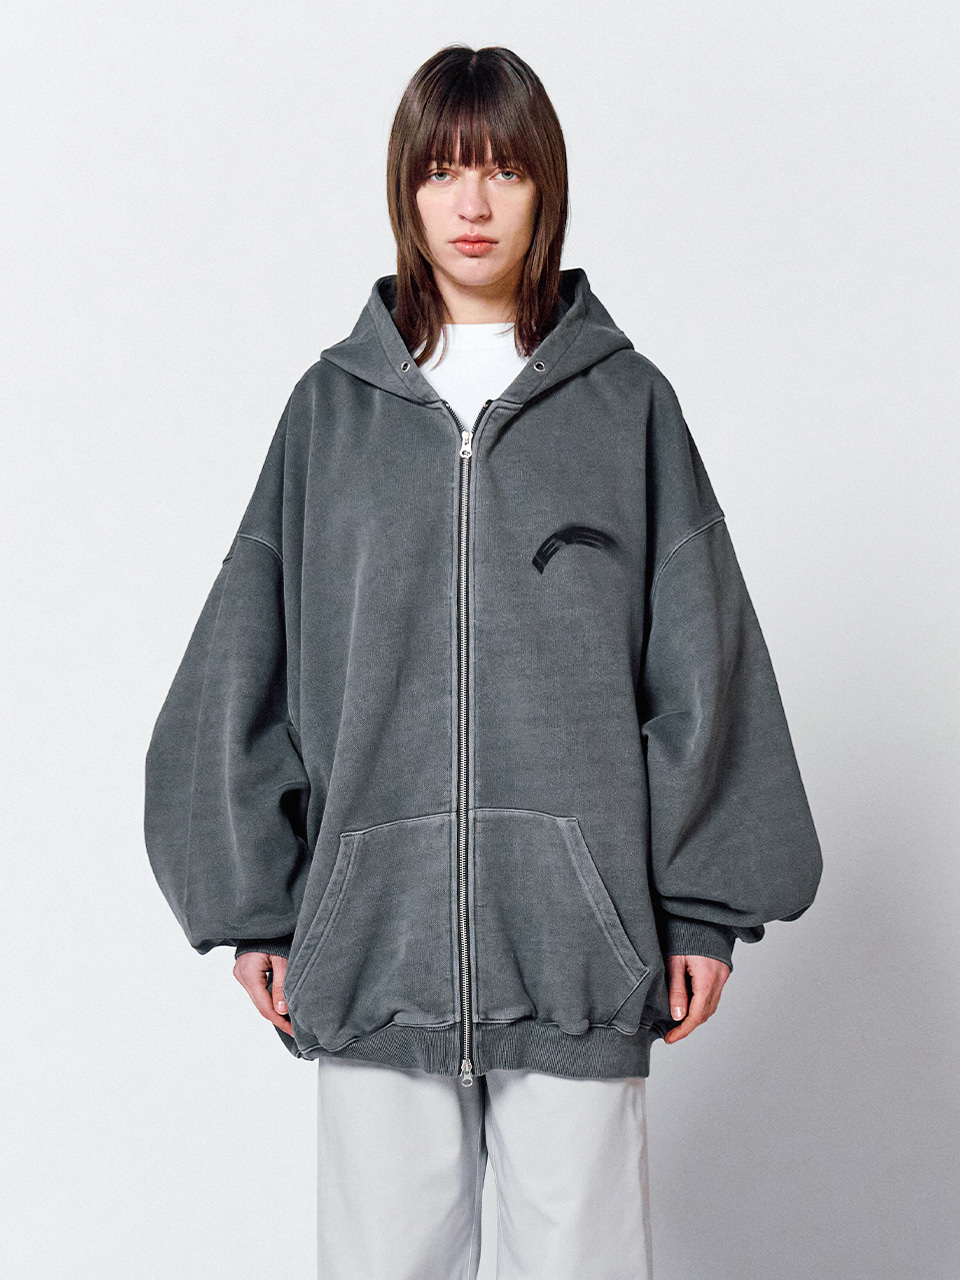 IEY - OVERSIZED MOTION LOGO HOODED ZIP-UP Charcoal